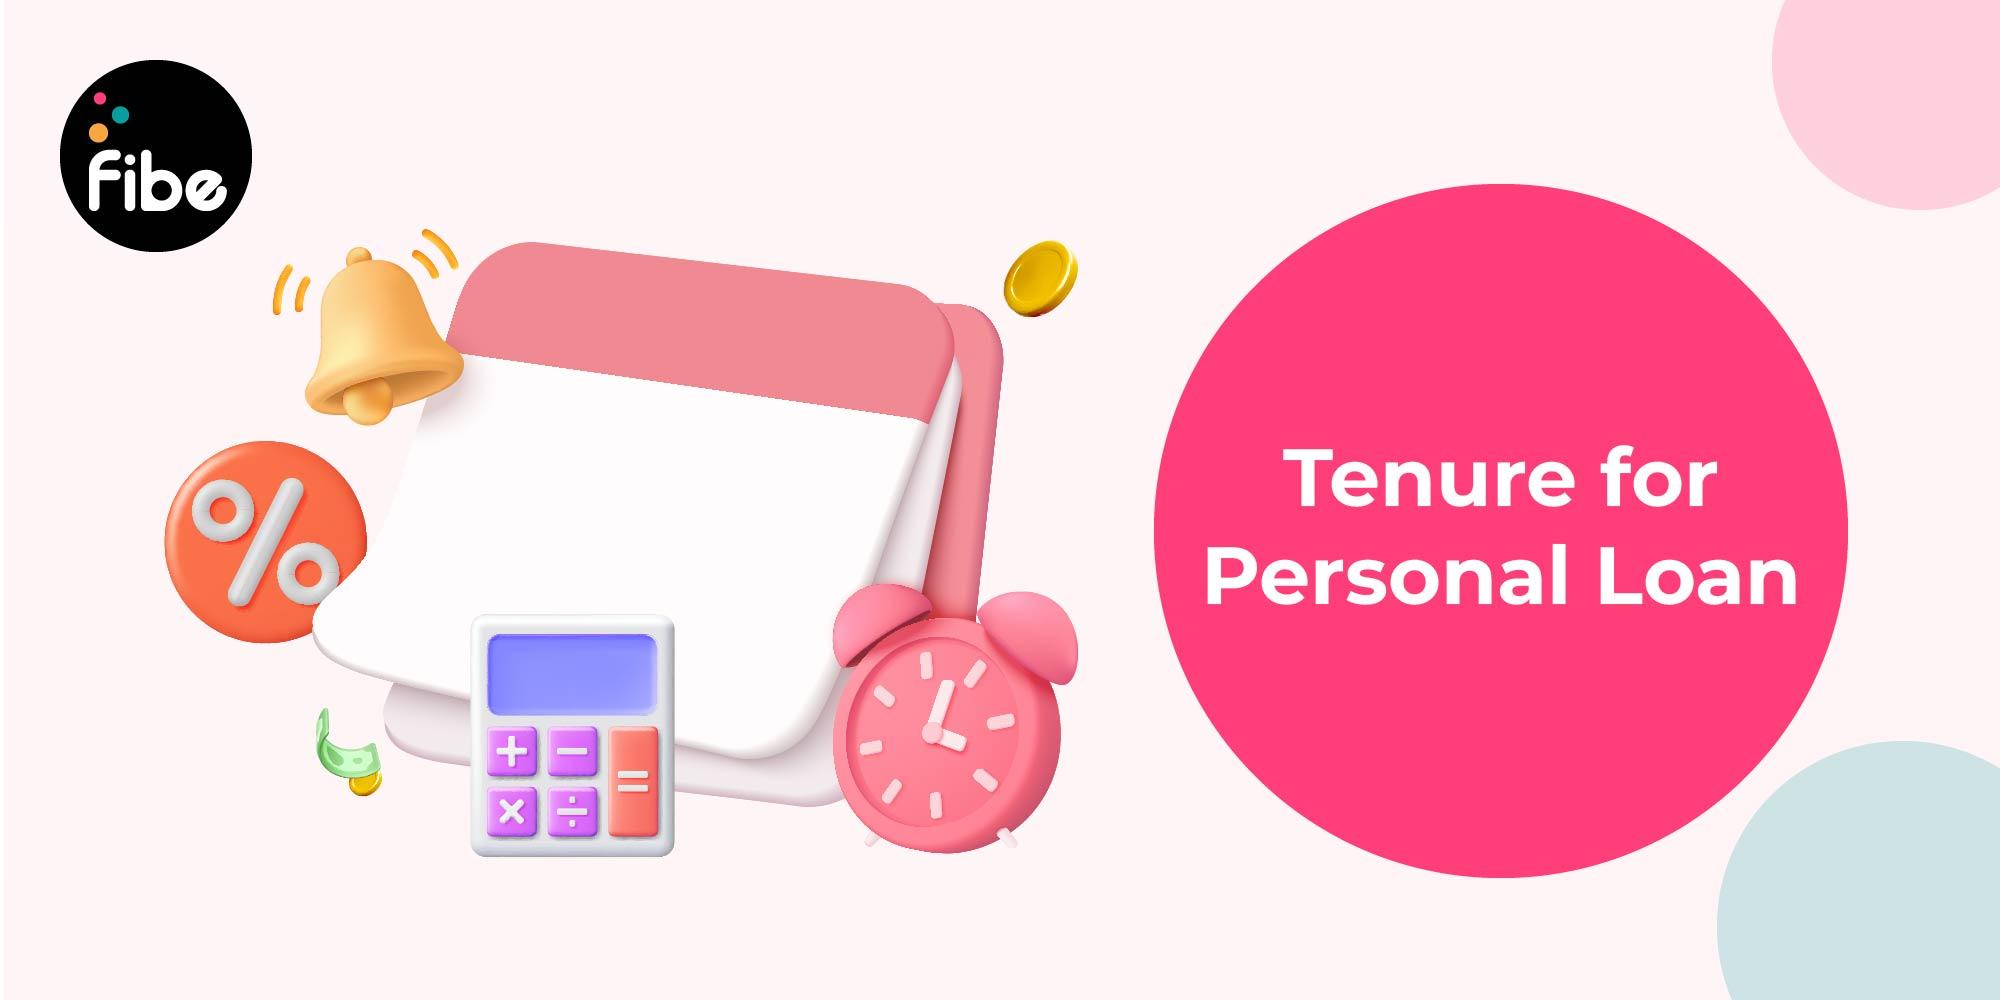 What are the Personal Loan maximum and minimum tenures?